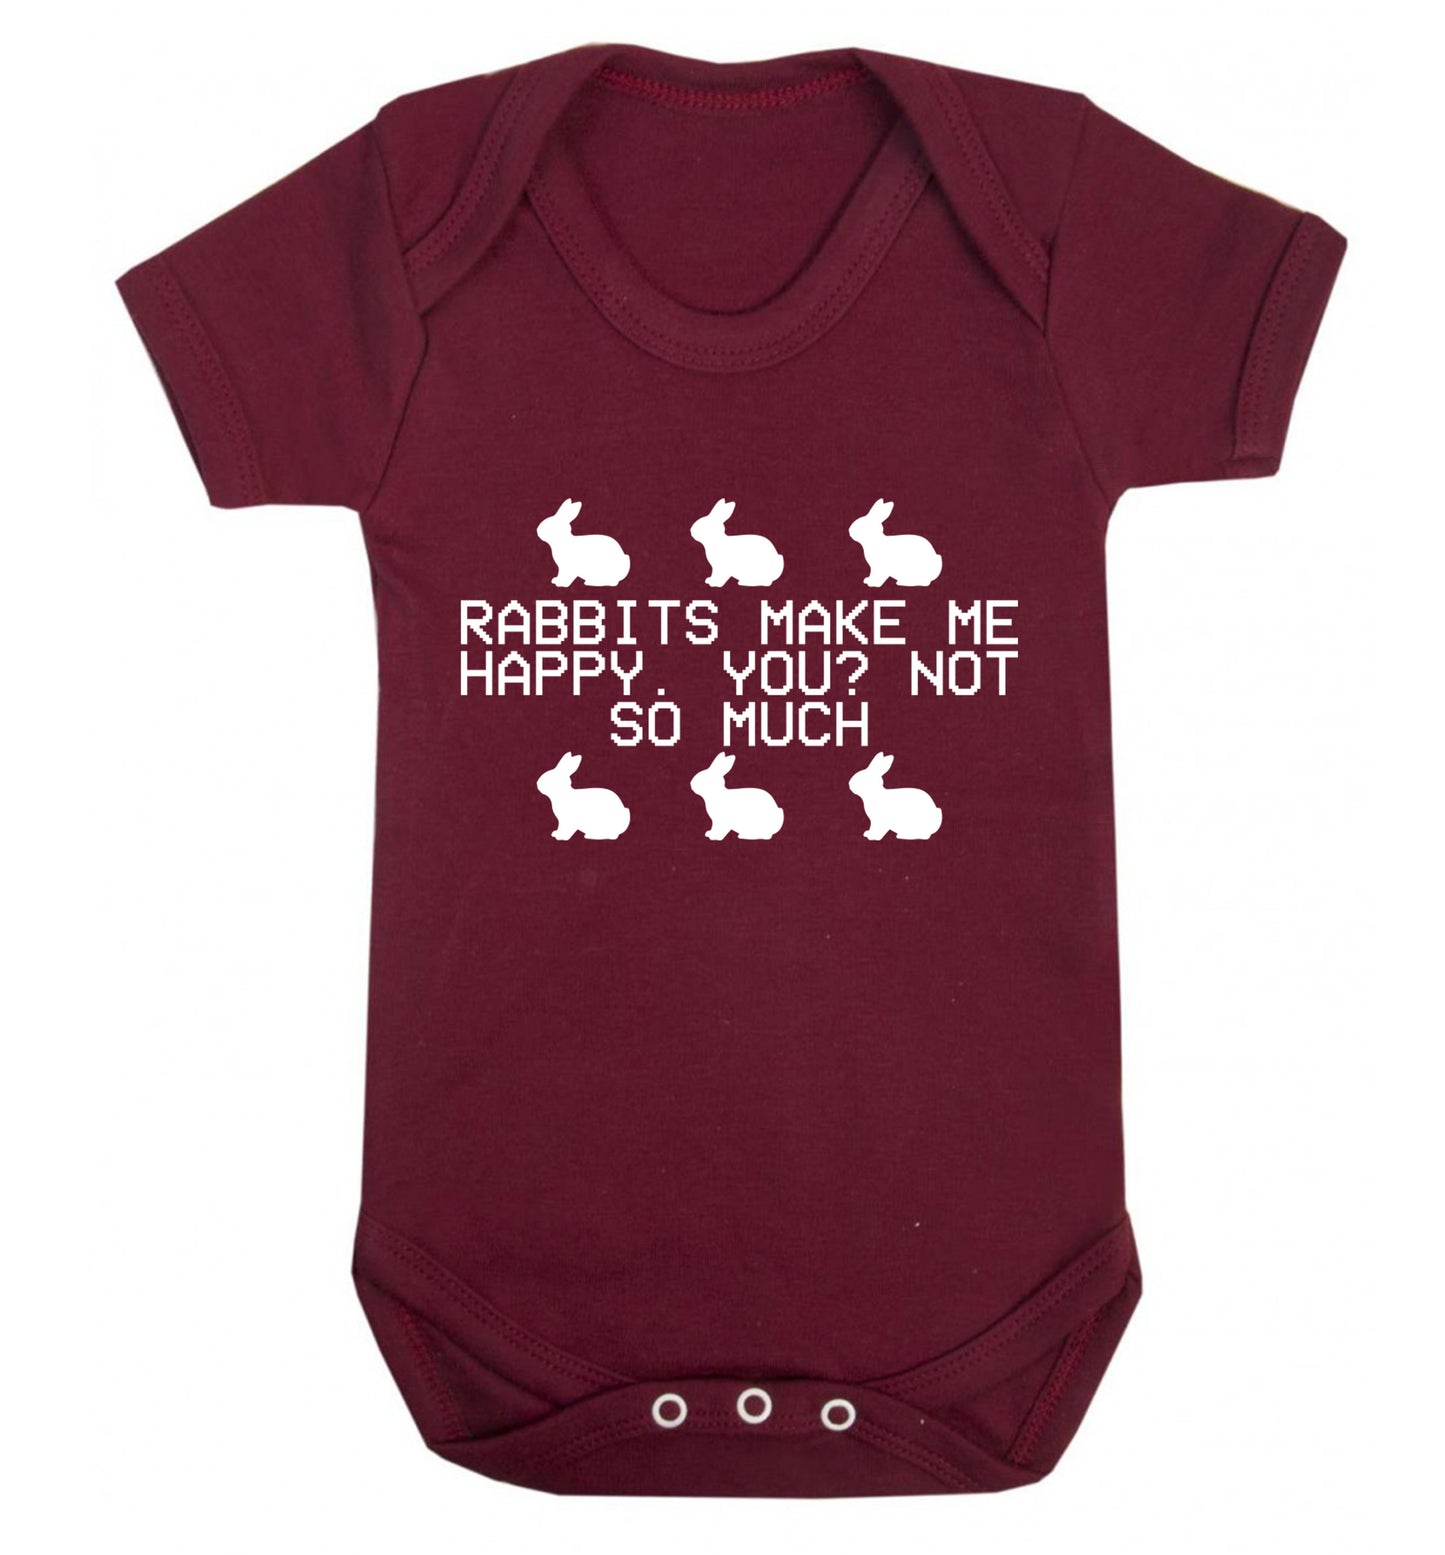 Rabbits make me happy, you not so much Baby Vest maroon 18-24 months